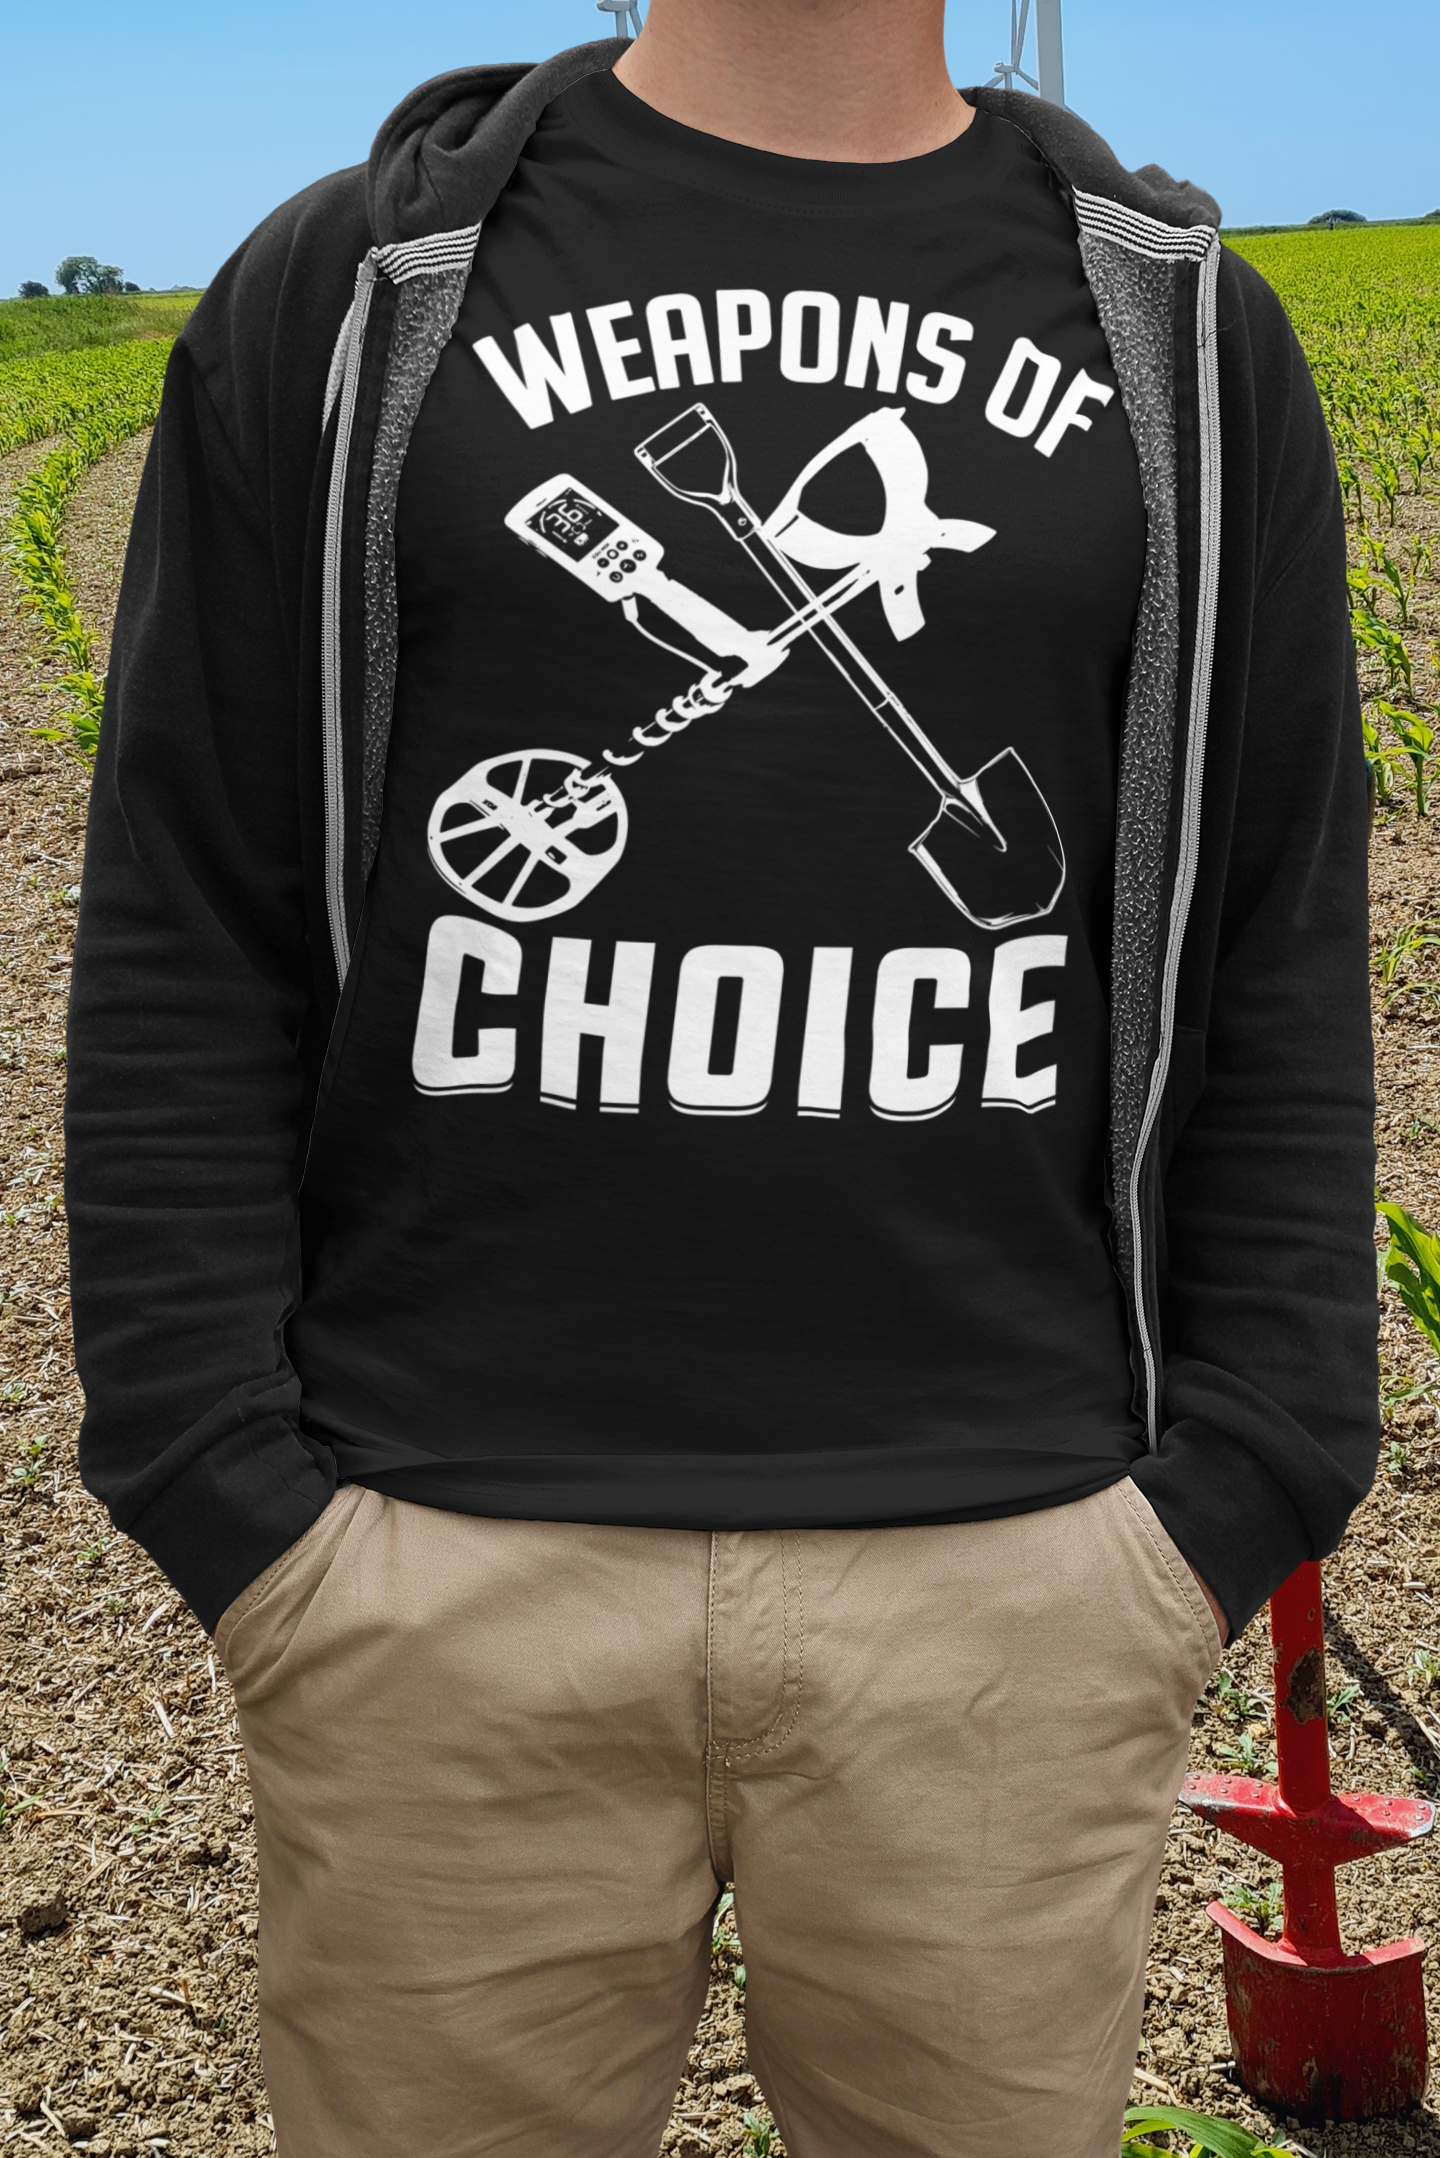 NOX - Weapons of choice T-shirt